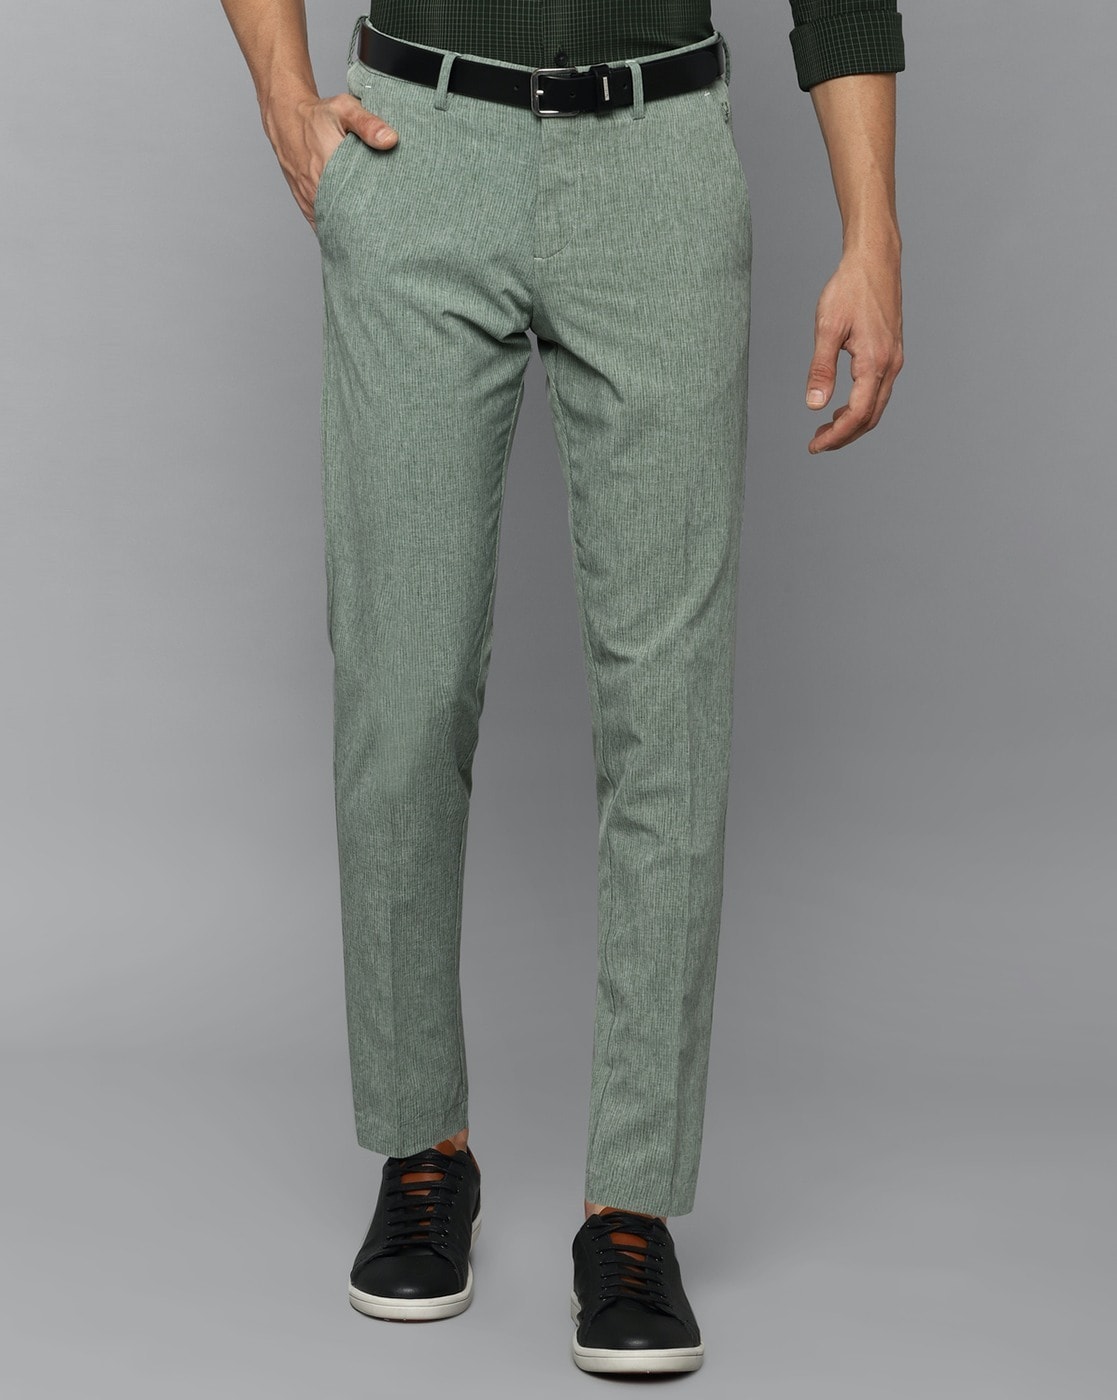 Allen Solly Blue Wimbledon Trousers : Amazon.in: Clothing & Accessories